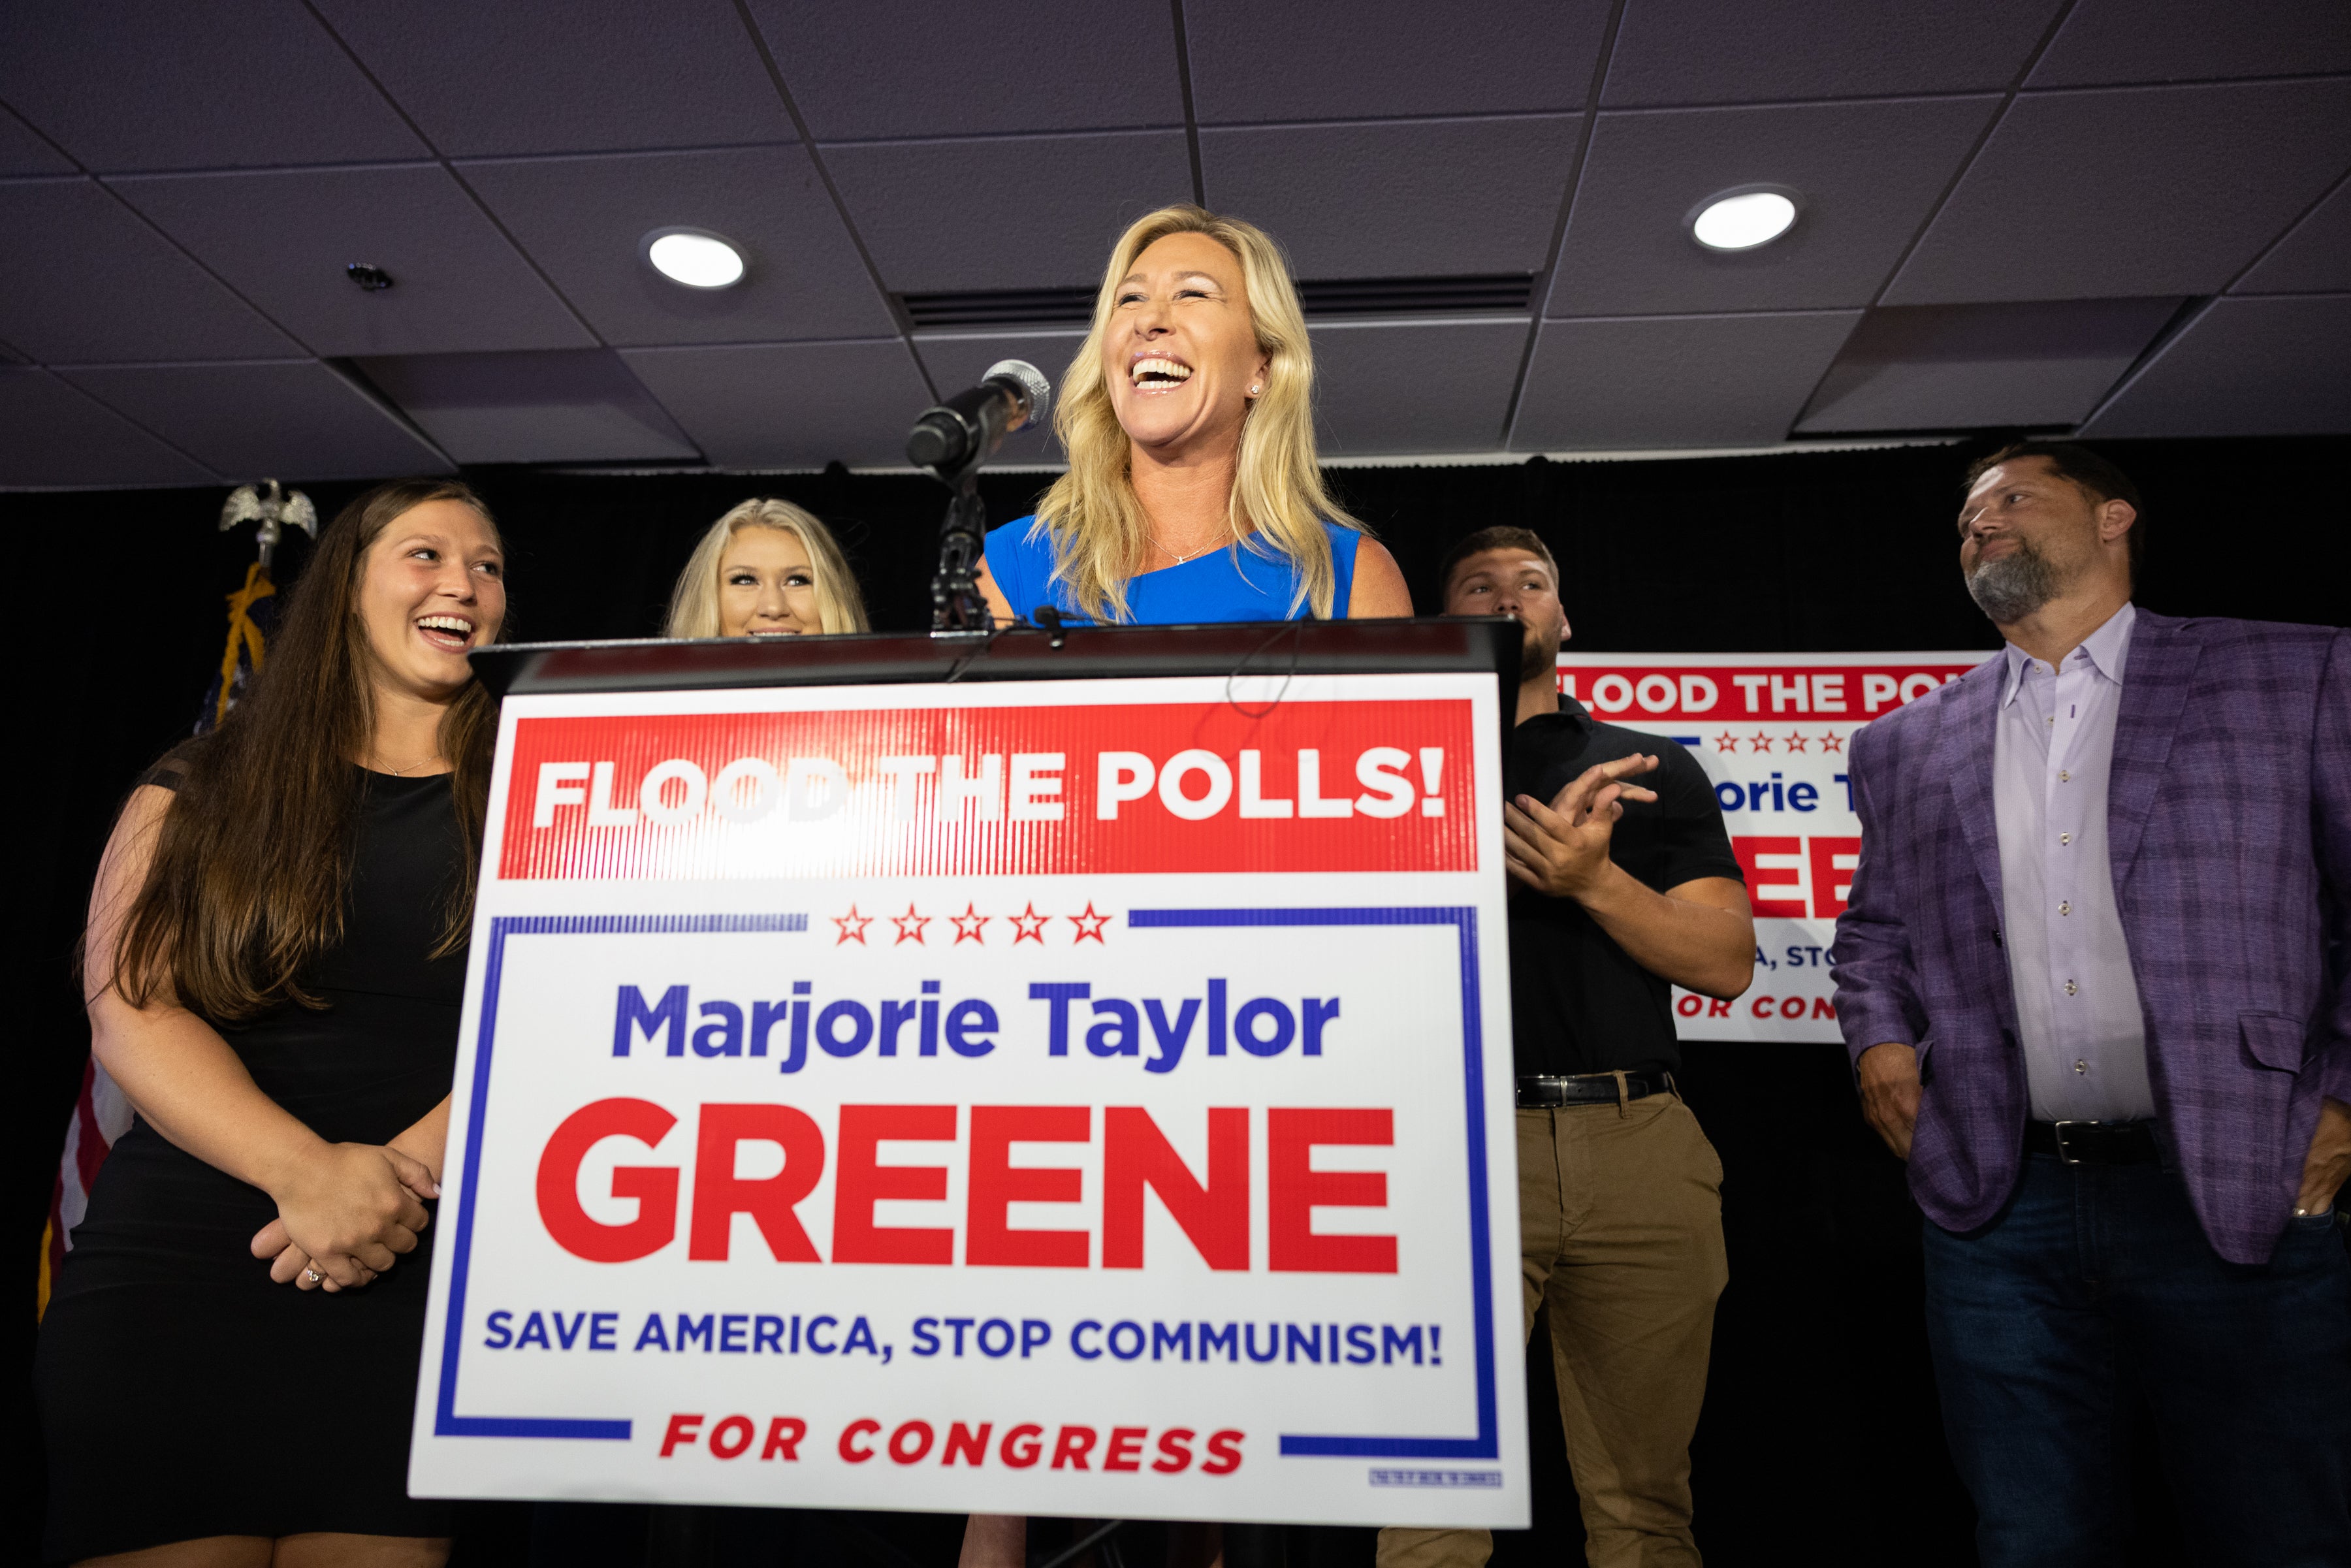 Marjorie Taylor Greene is hoping to continue winning big off anger and paranoia